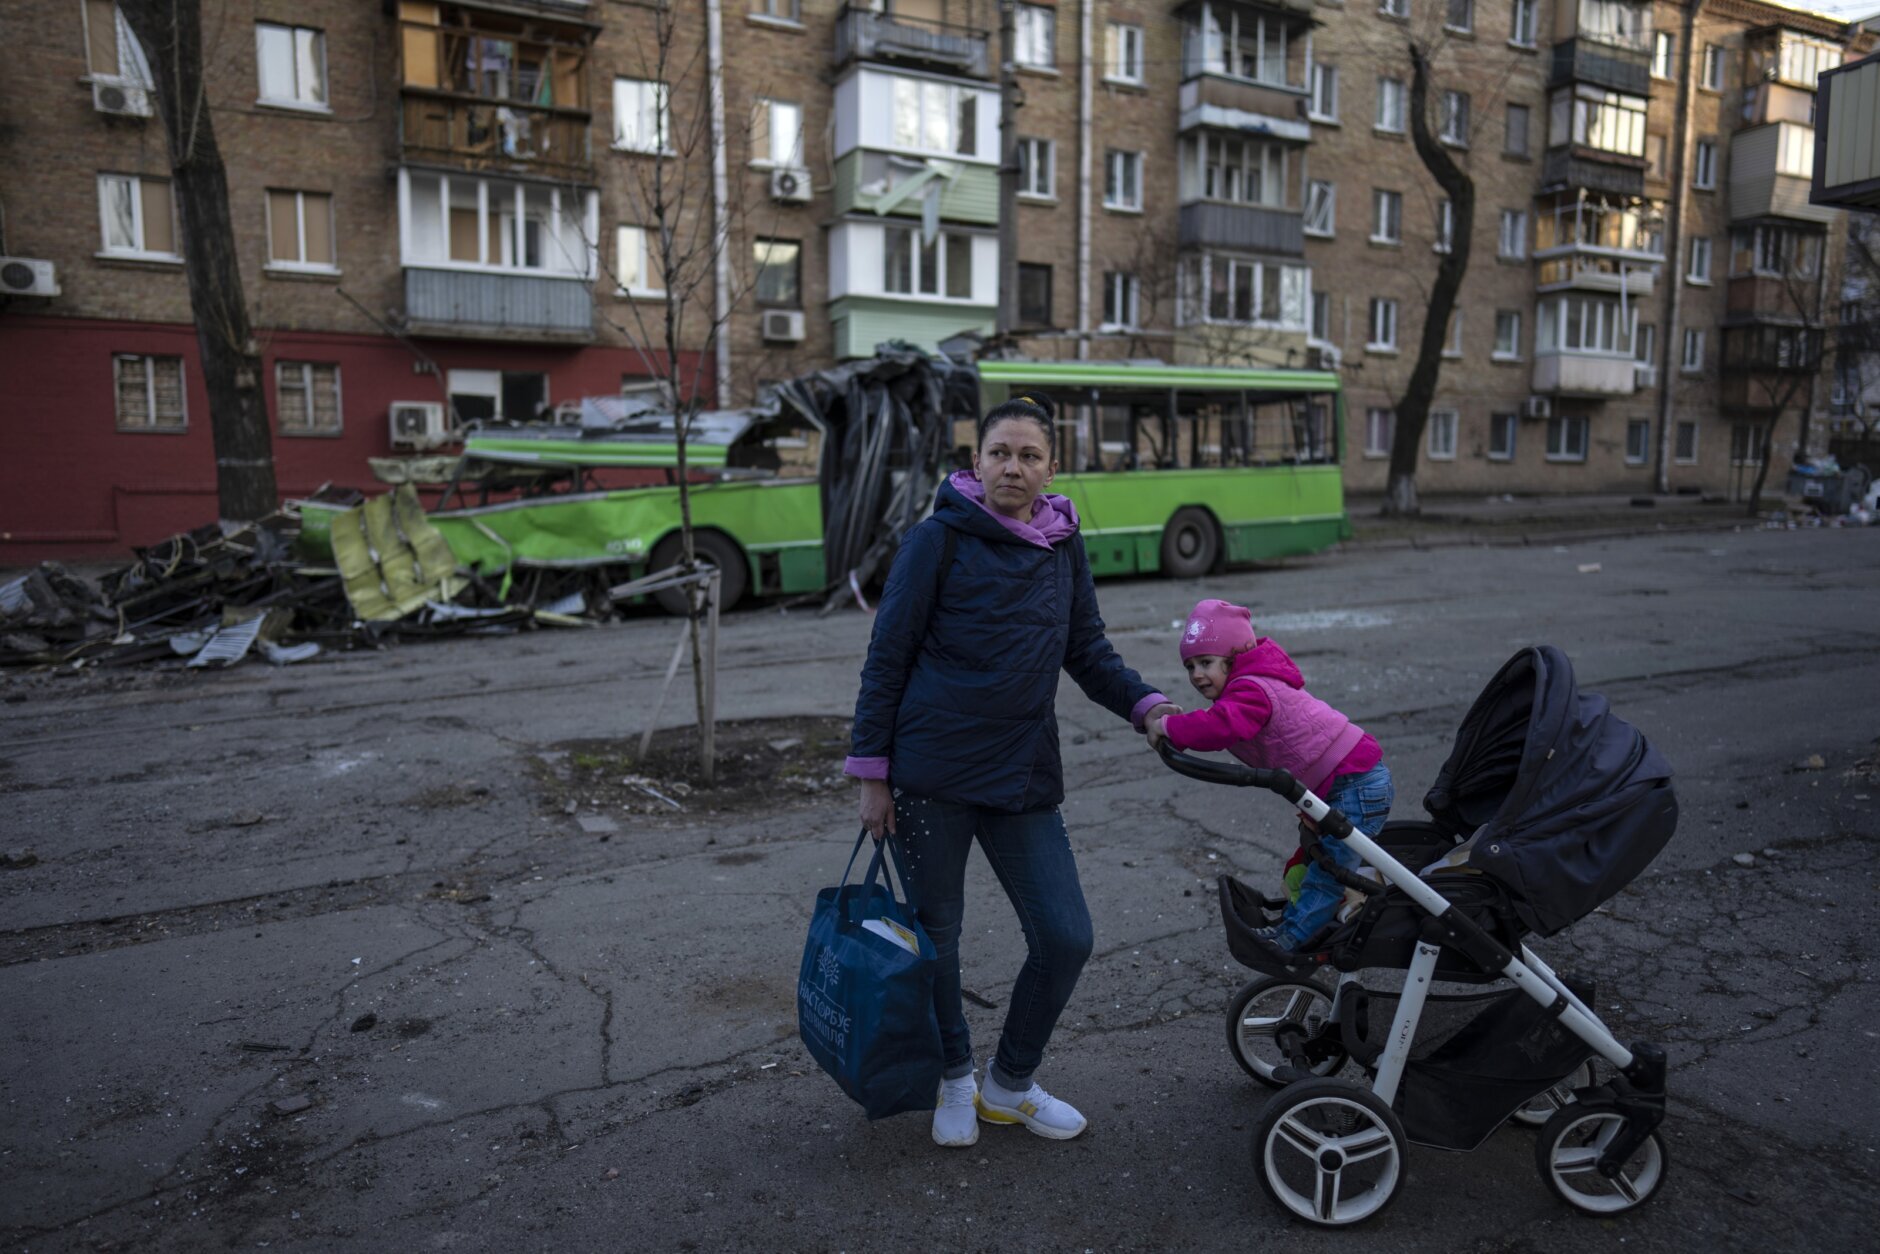 Lena Danilova, 39, walks with her daughter Kira, 2, near her house in Podolskyi neighborhood, Kyiv, Ukraine, Friday, March 25, 2022. "I decided to stay, but since it continues so long, I don't think its safe any more, so I am working on leaving soon with my other two sons", said Lena to The Associated Press. (AP Photo/Rodrigo Abd)